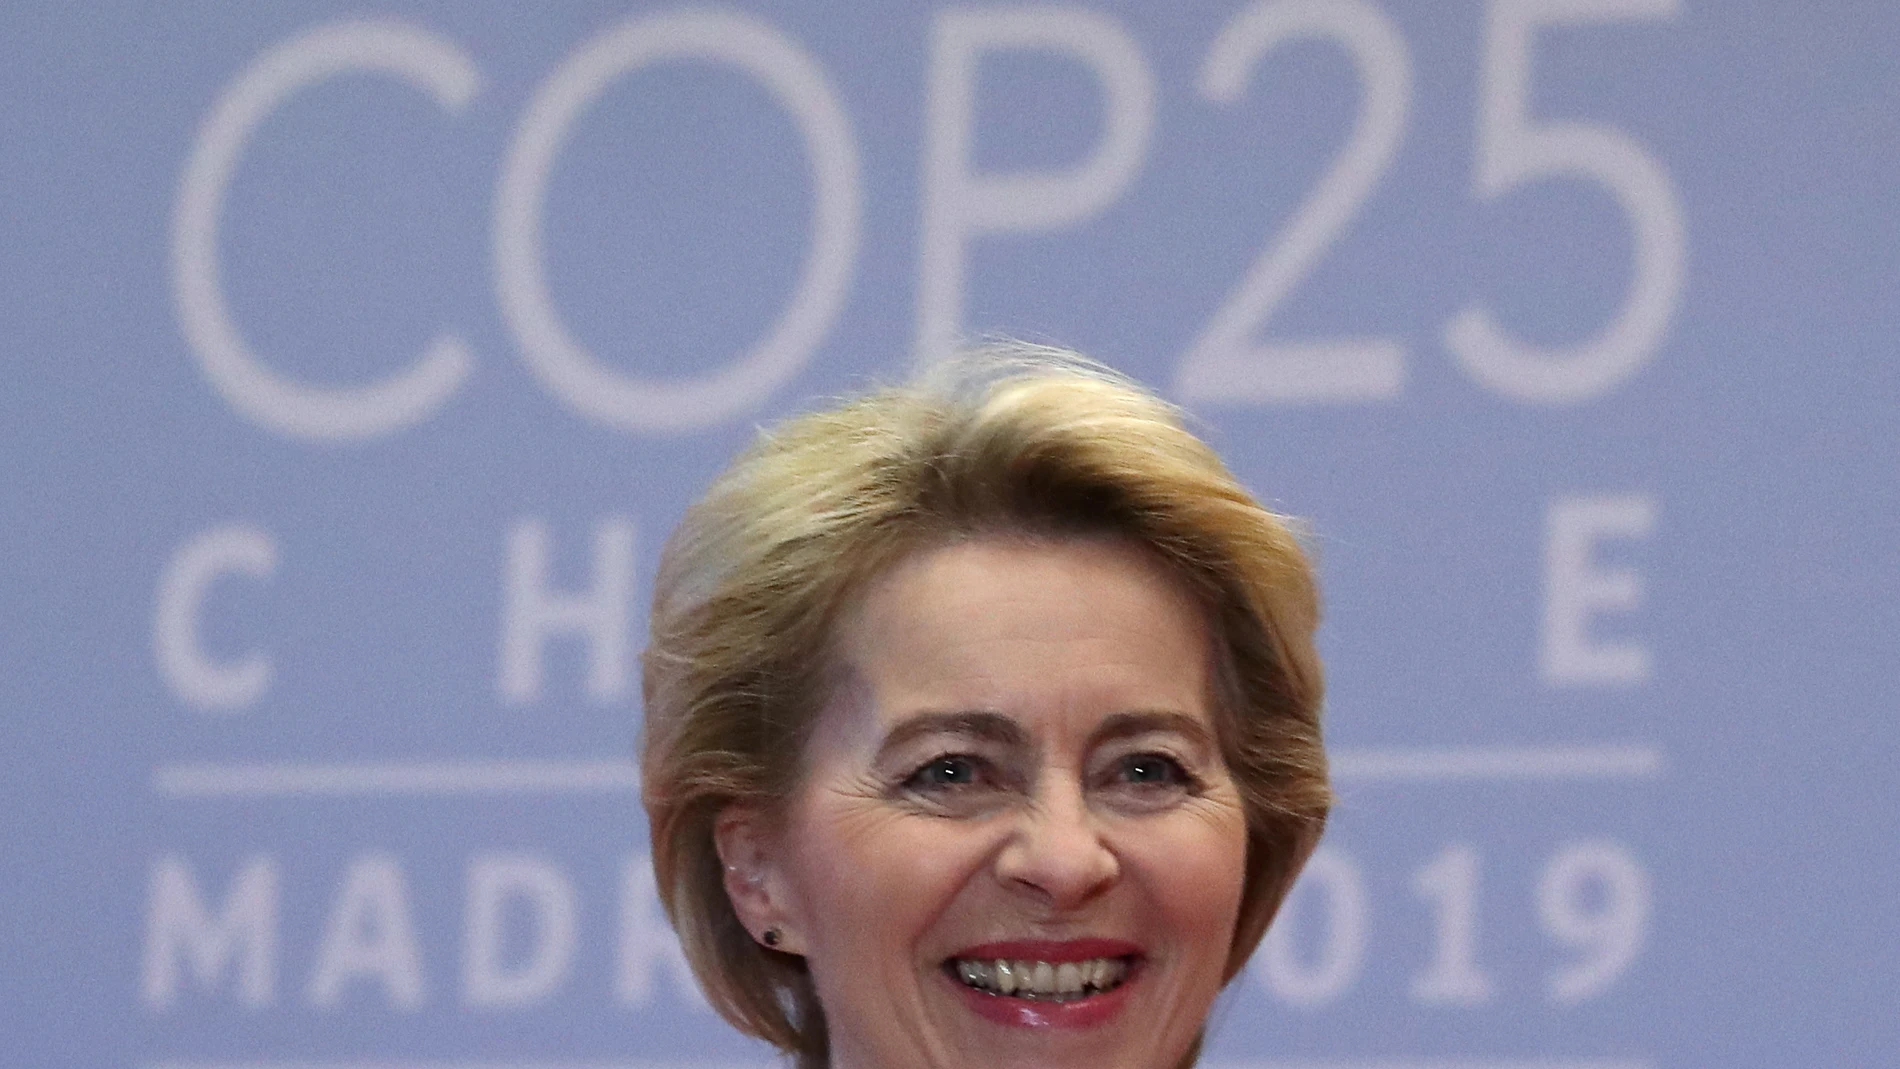 U.N. climate change conference (COP25) in Madrid